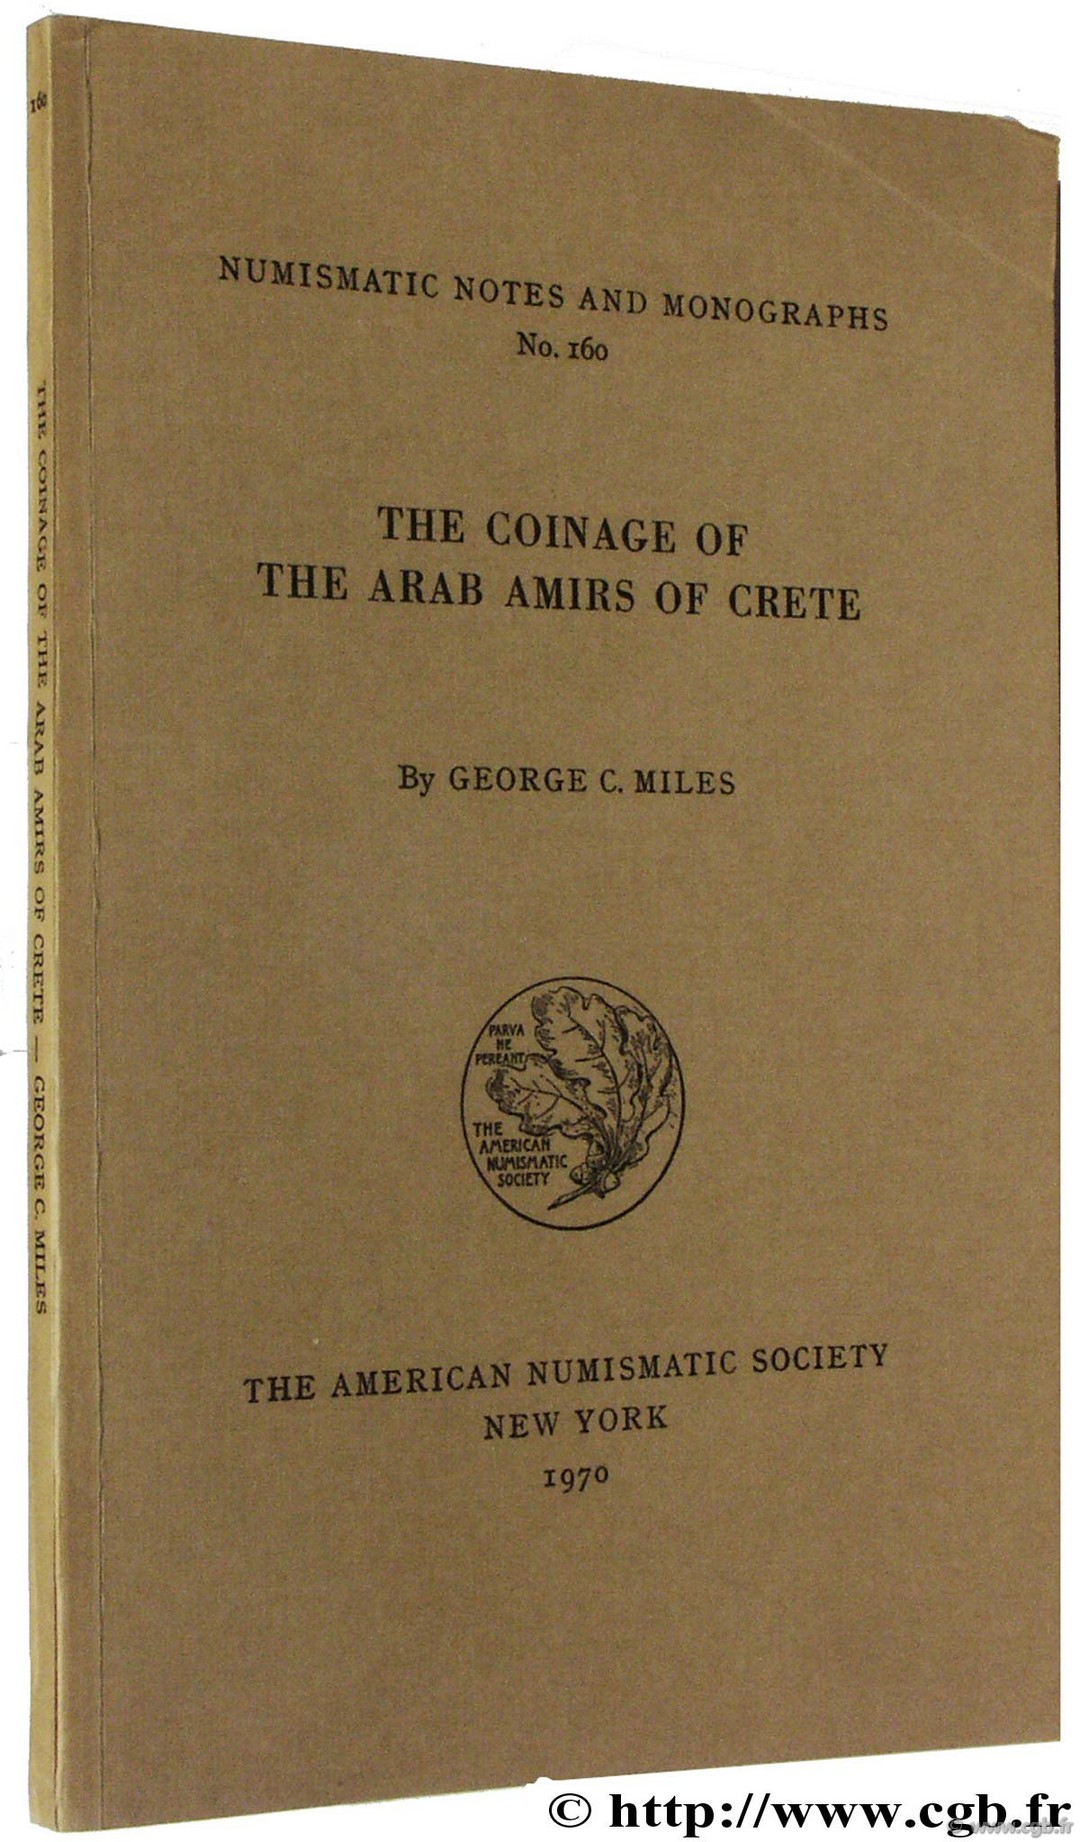 The Coinage of the Arab Amirs of Crete, NNM n° 160 MILES G.-C.